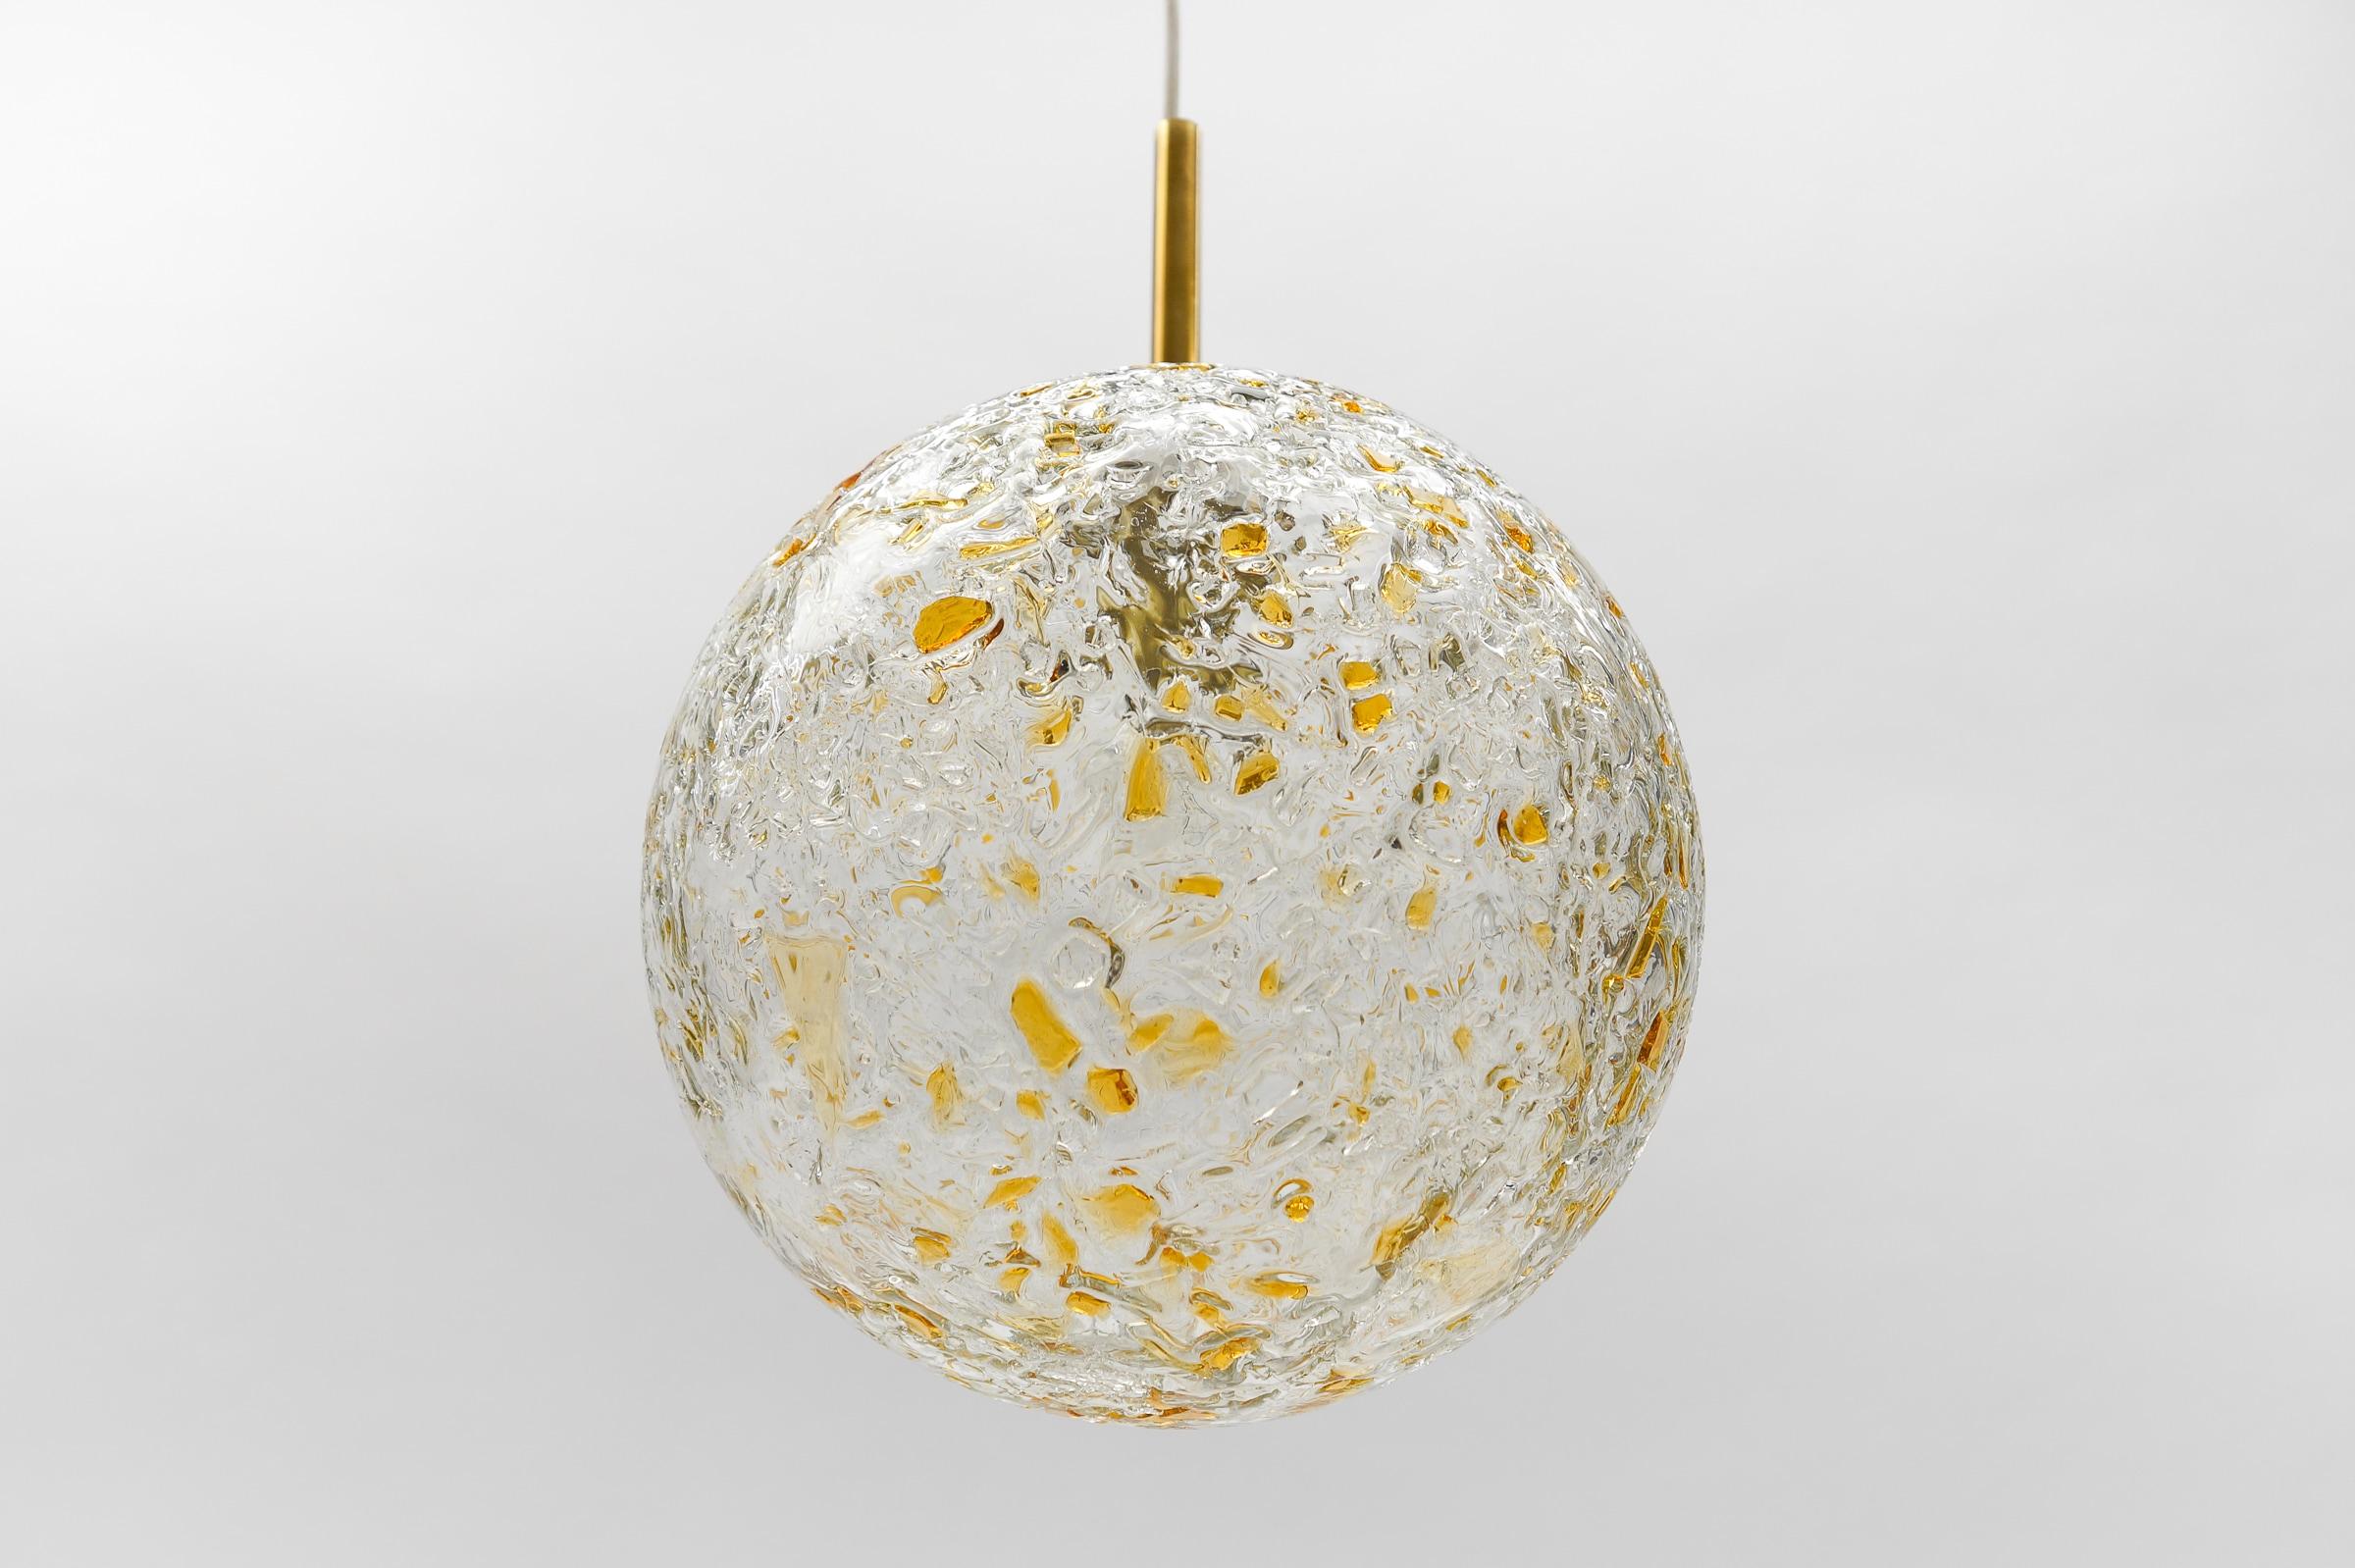 Lovely Mid-Century Modern Glass Ball Pendant Lamp by Doria, 1960s Germany For Sale 1